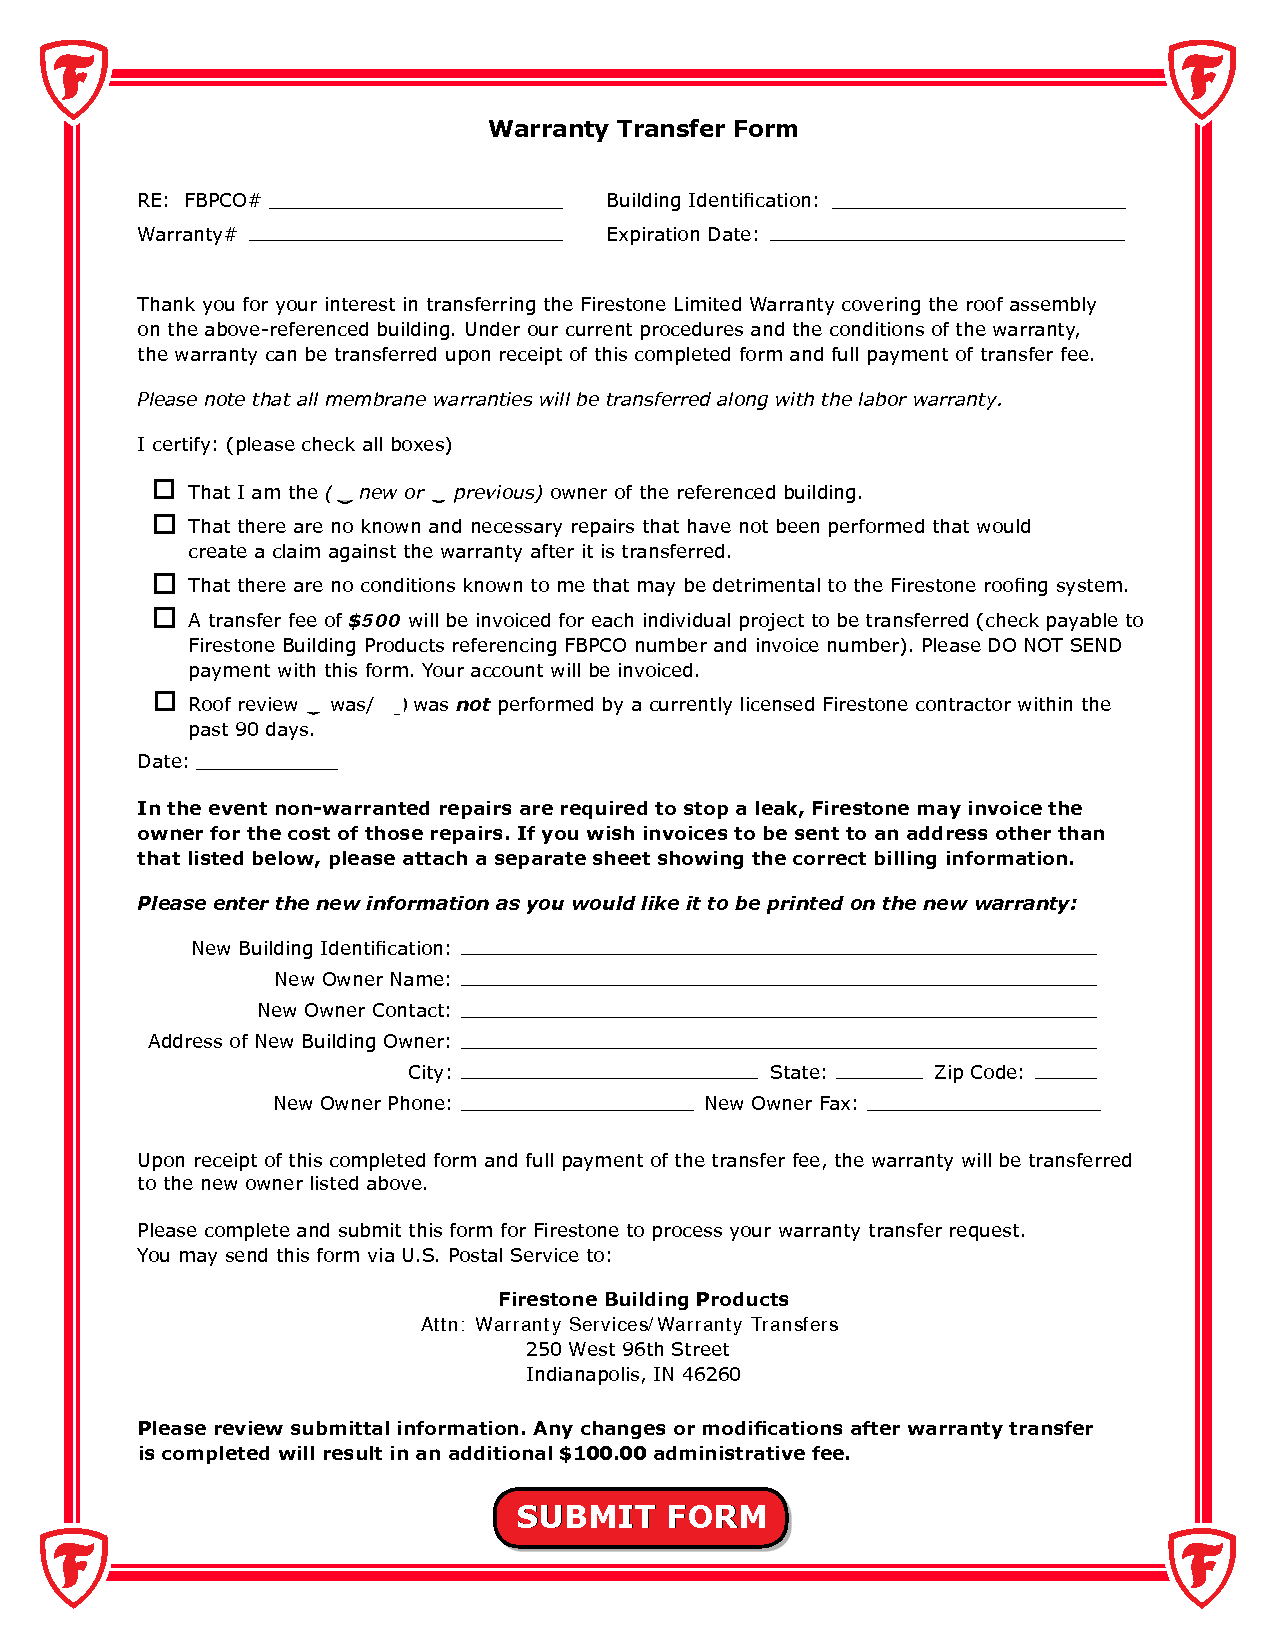 warranty-template-free-printable-documents